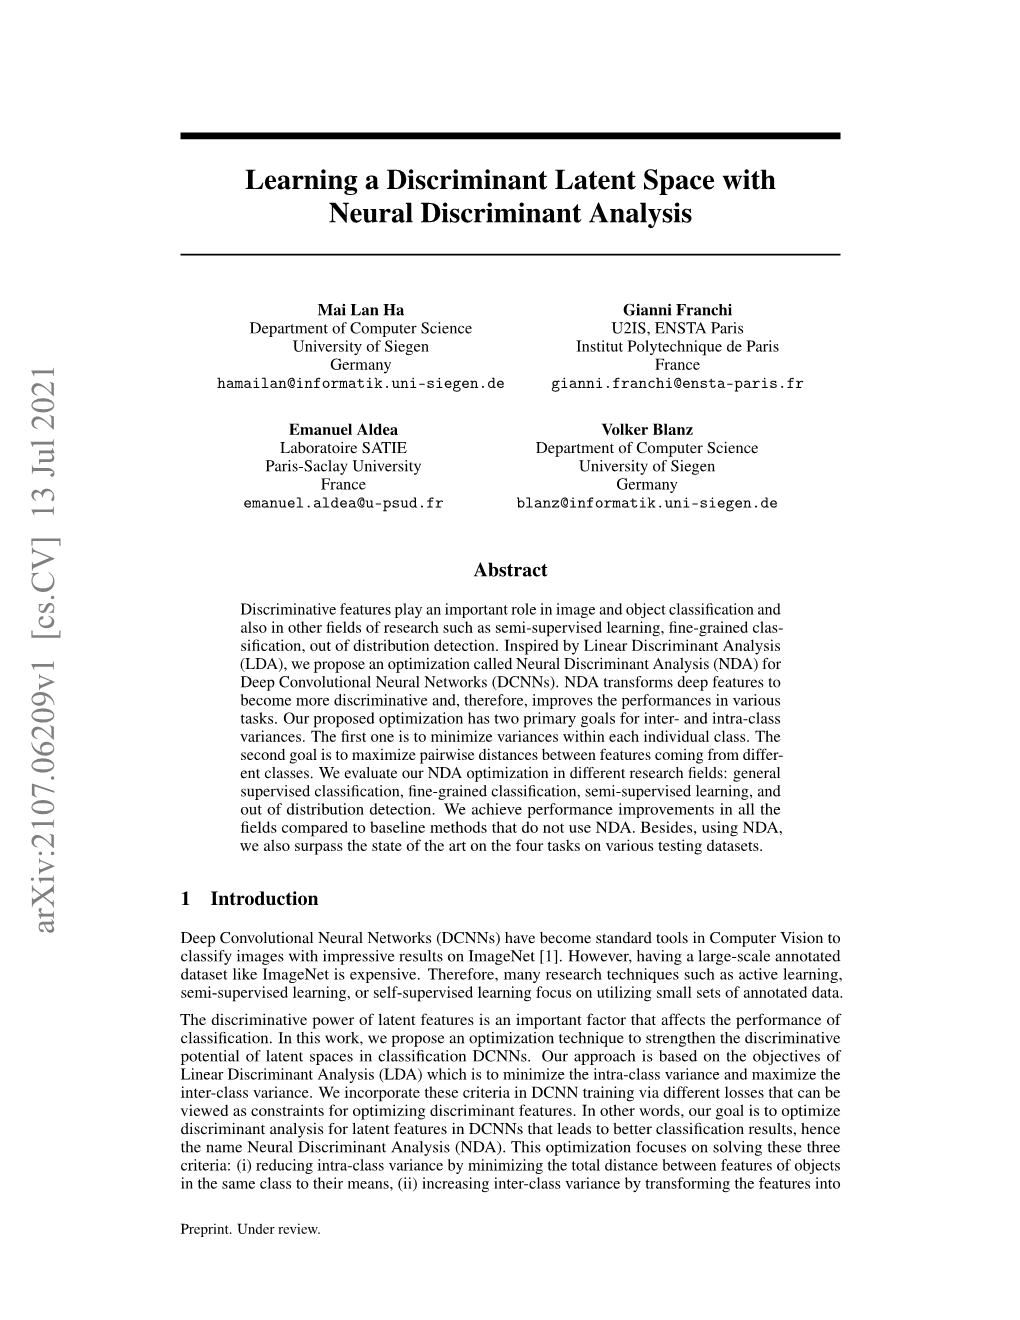 Learning a Discriminant Latent Space with Neural Discriminant Analysis